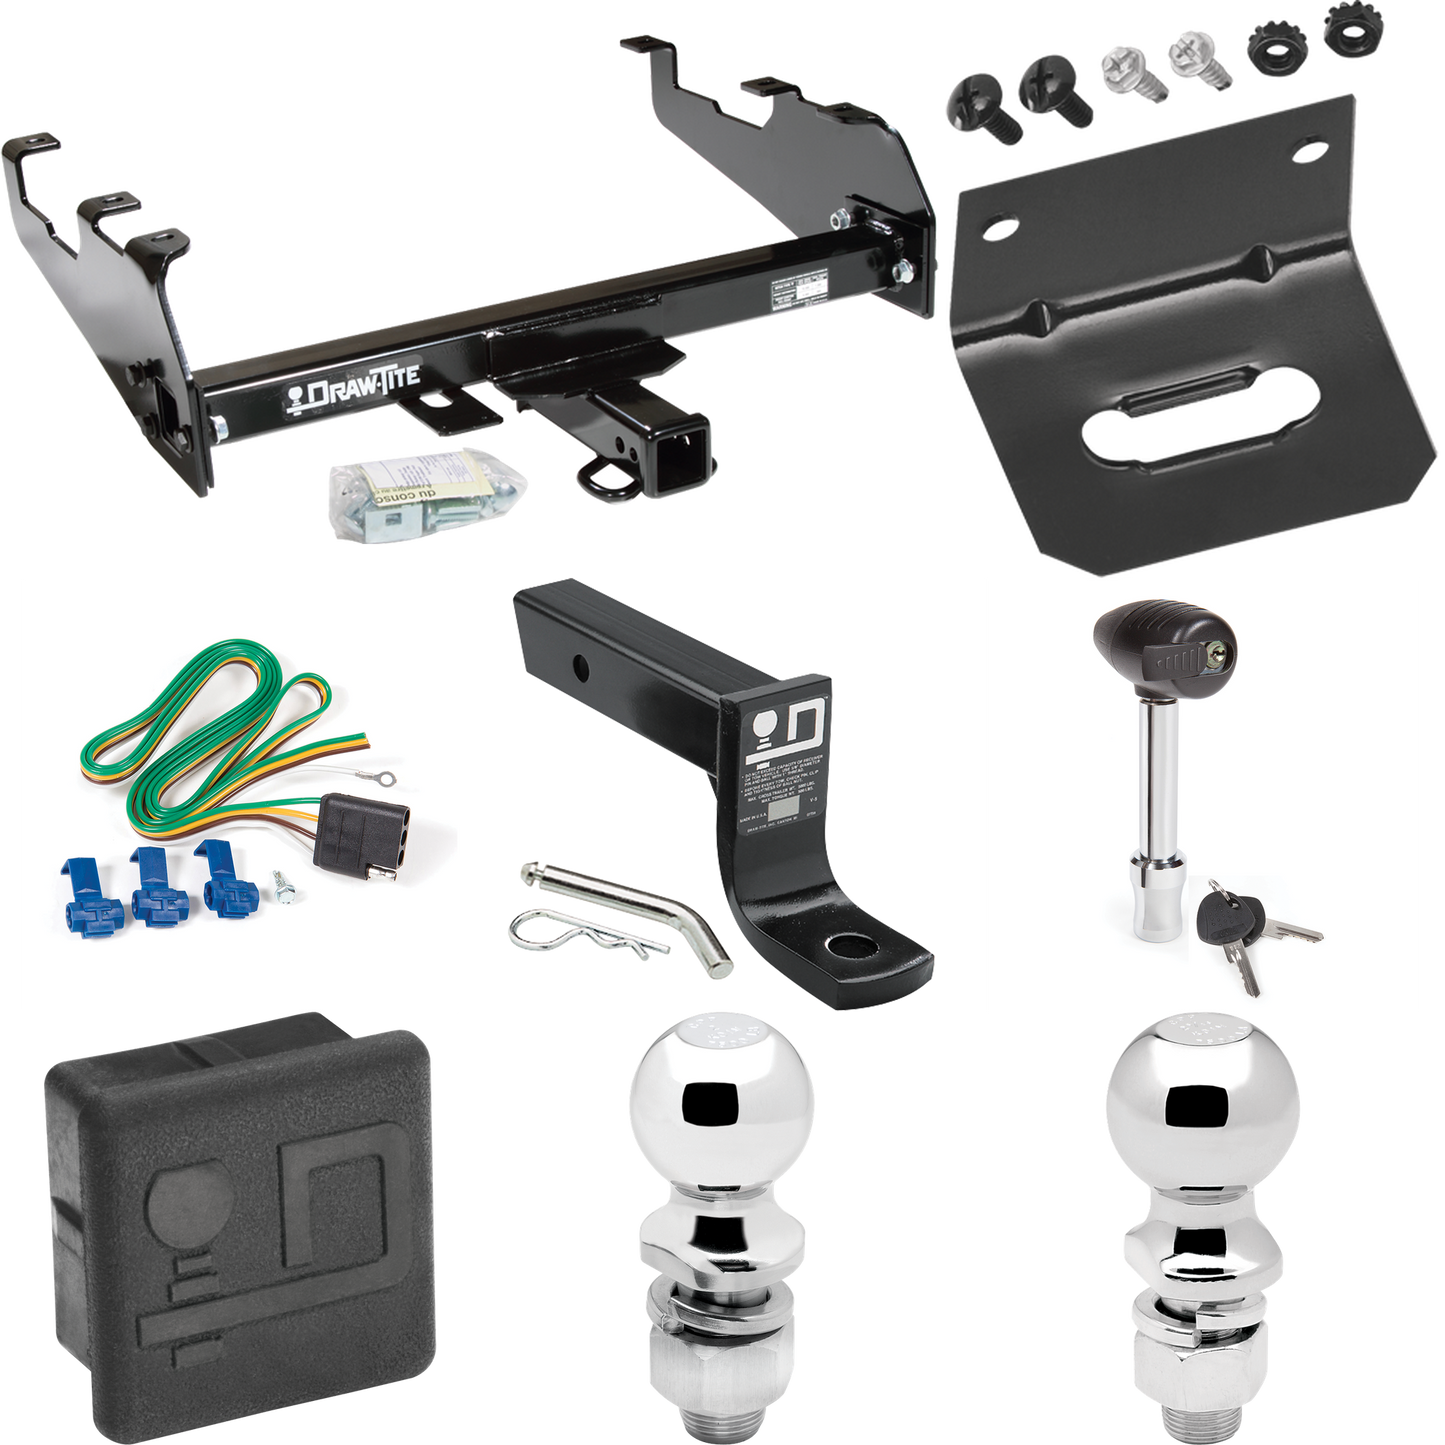 Fits 1967-1977 Dodge W100 Trailer Hitch Tow PKG w/ 4-Flat Wiring + Ball Mount w/ 4" Drop + 2" Ball + 2-5/16" Ball + Wiring Bracket + Hitch Lock + Hitch Cover (For w/Deep Drop Bumper Models) By Draw-Tite